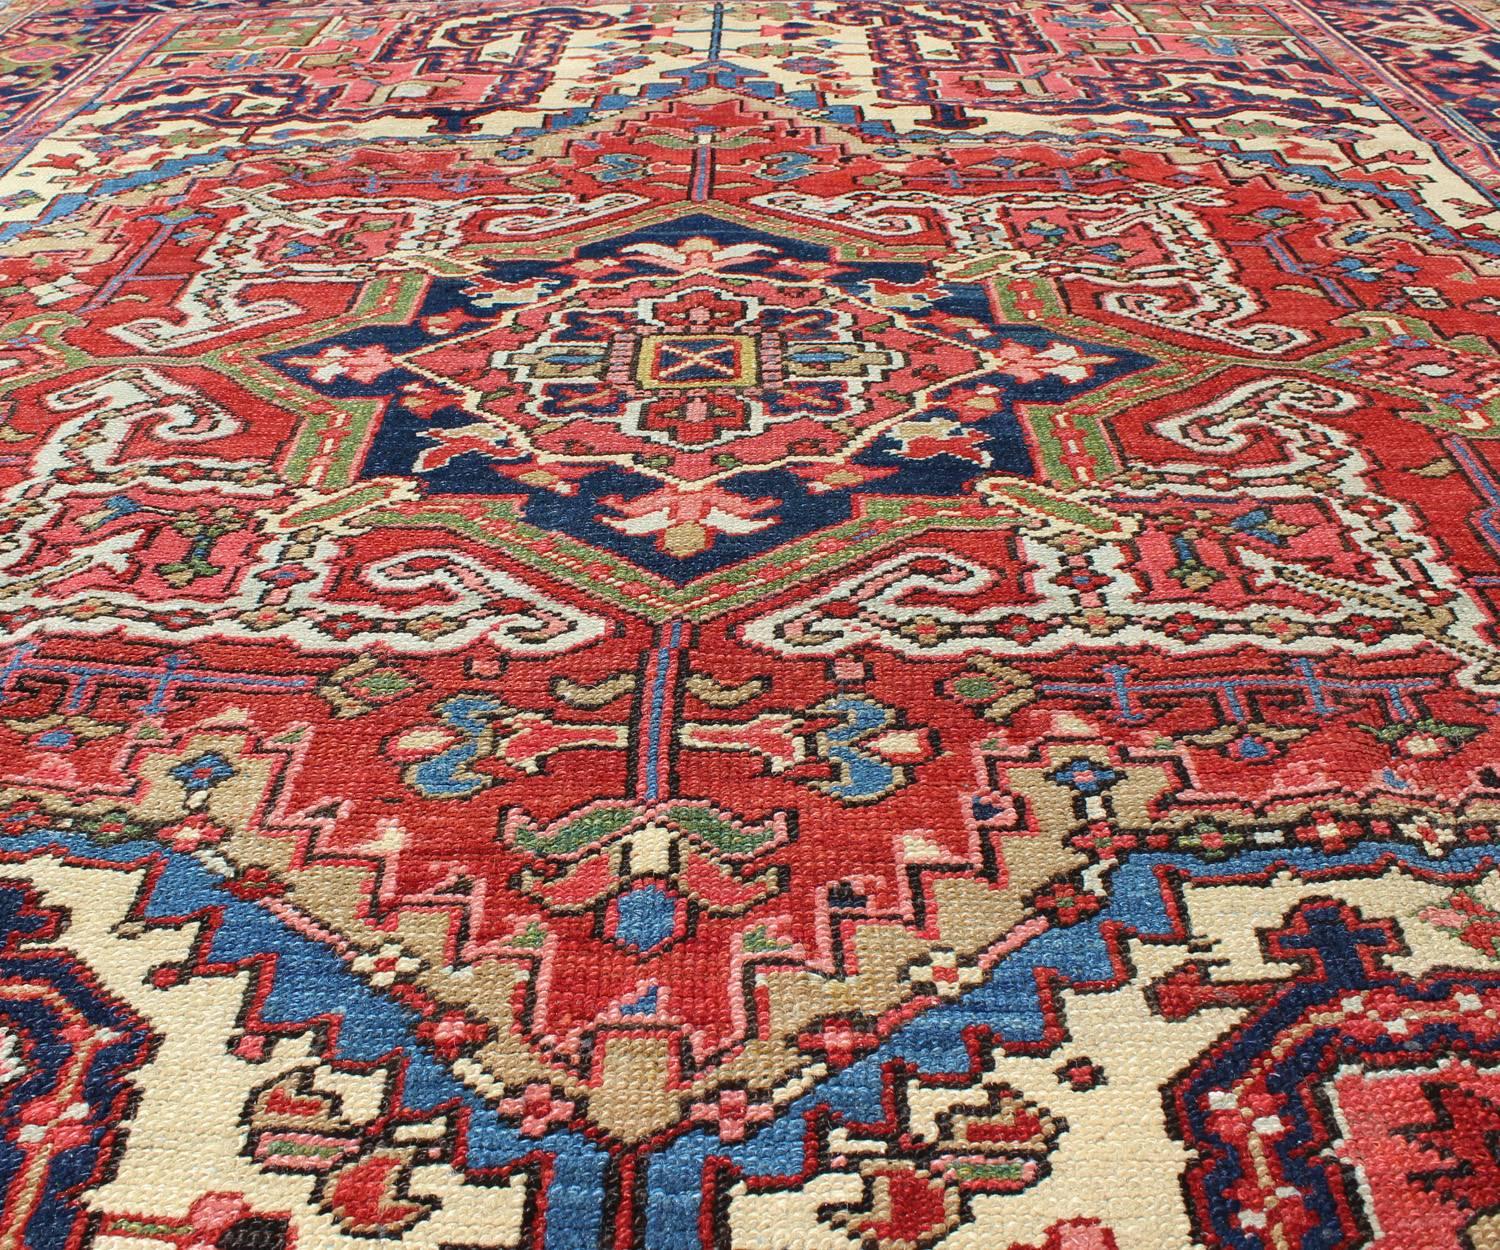 Early 20th Century Antique Persian Heriz Carpet with Stylized Central Medallion in Warm Hues of Red